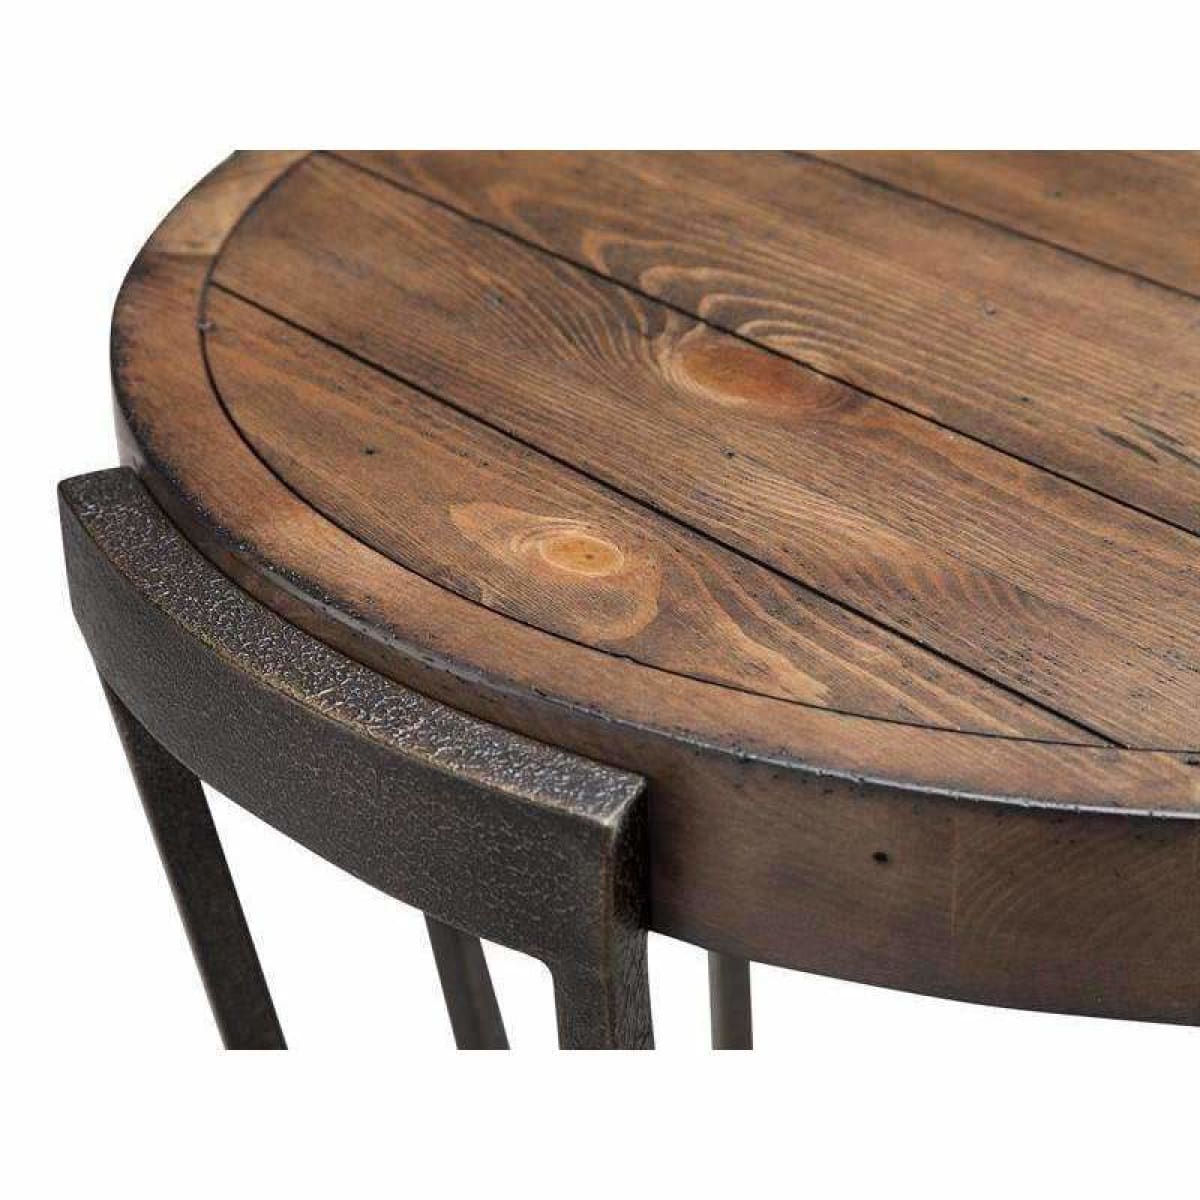 Yukon Round End Table - END TABLE/SIDE TABLE